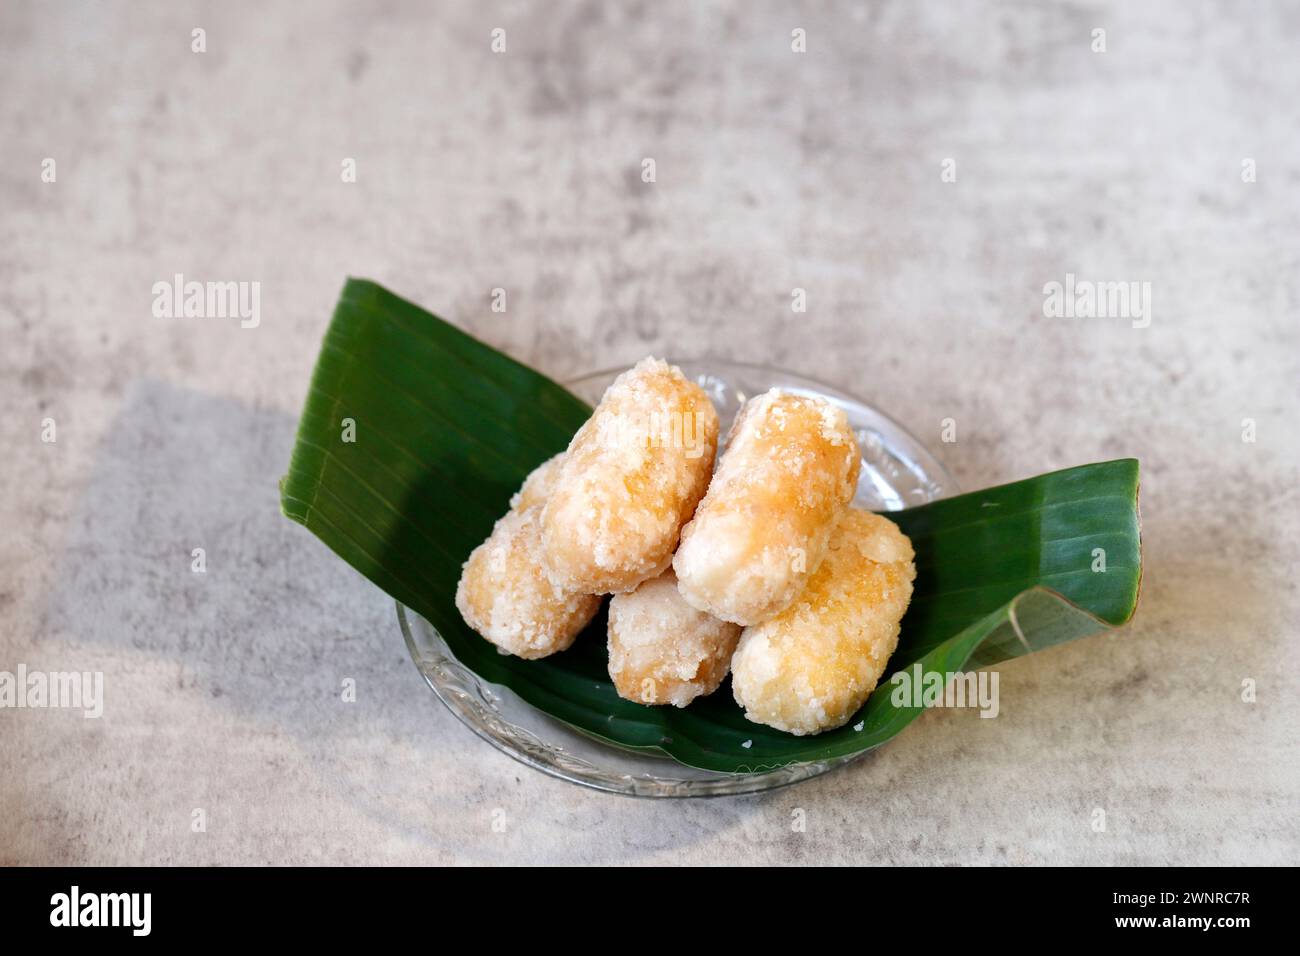 Kue Getas Ketan or Gemblong, Sticky Rice Cake with Melted Sugar Coating, Indonesia Food Stock Photo